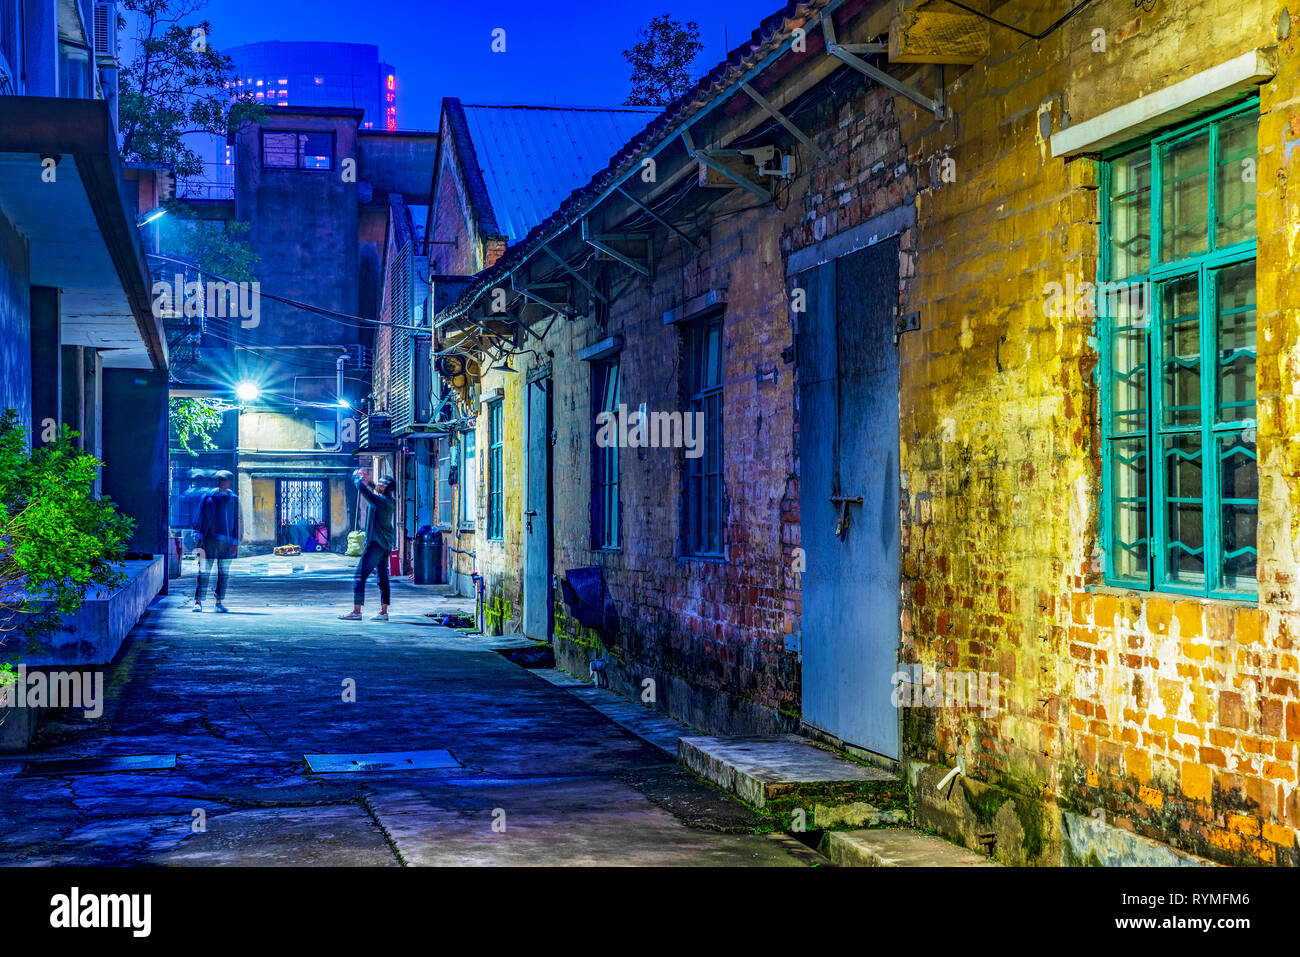 GUANGZHOU, CHINA - OCTOBER 19: This is a night view of an alley with old abandoned warehouse buildings at Redtory Art and Design Factory on October 19 Stock Photo